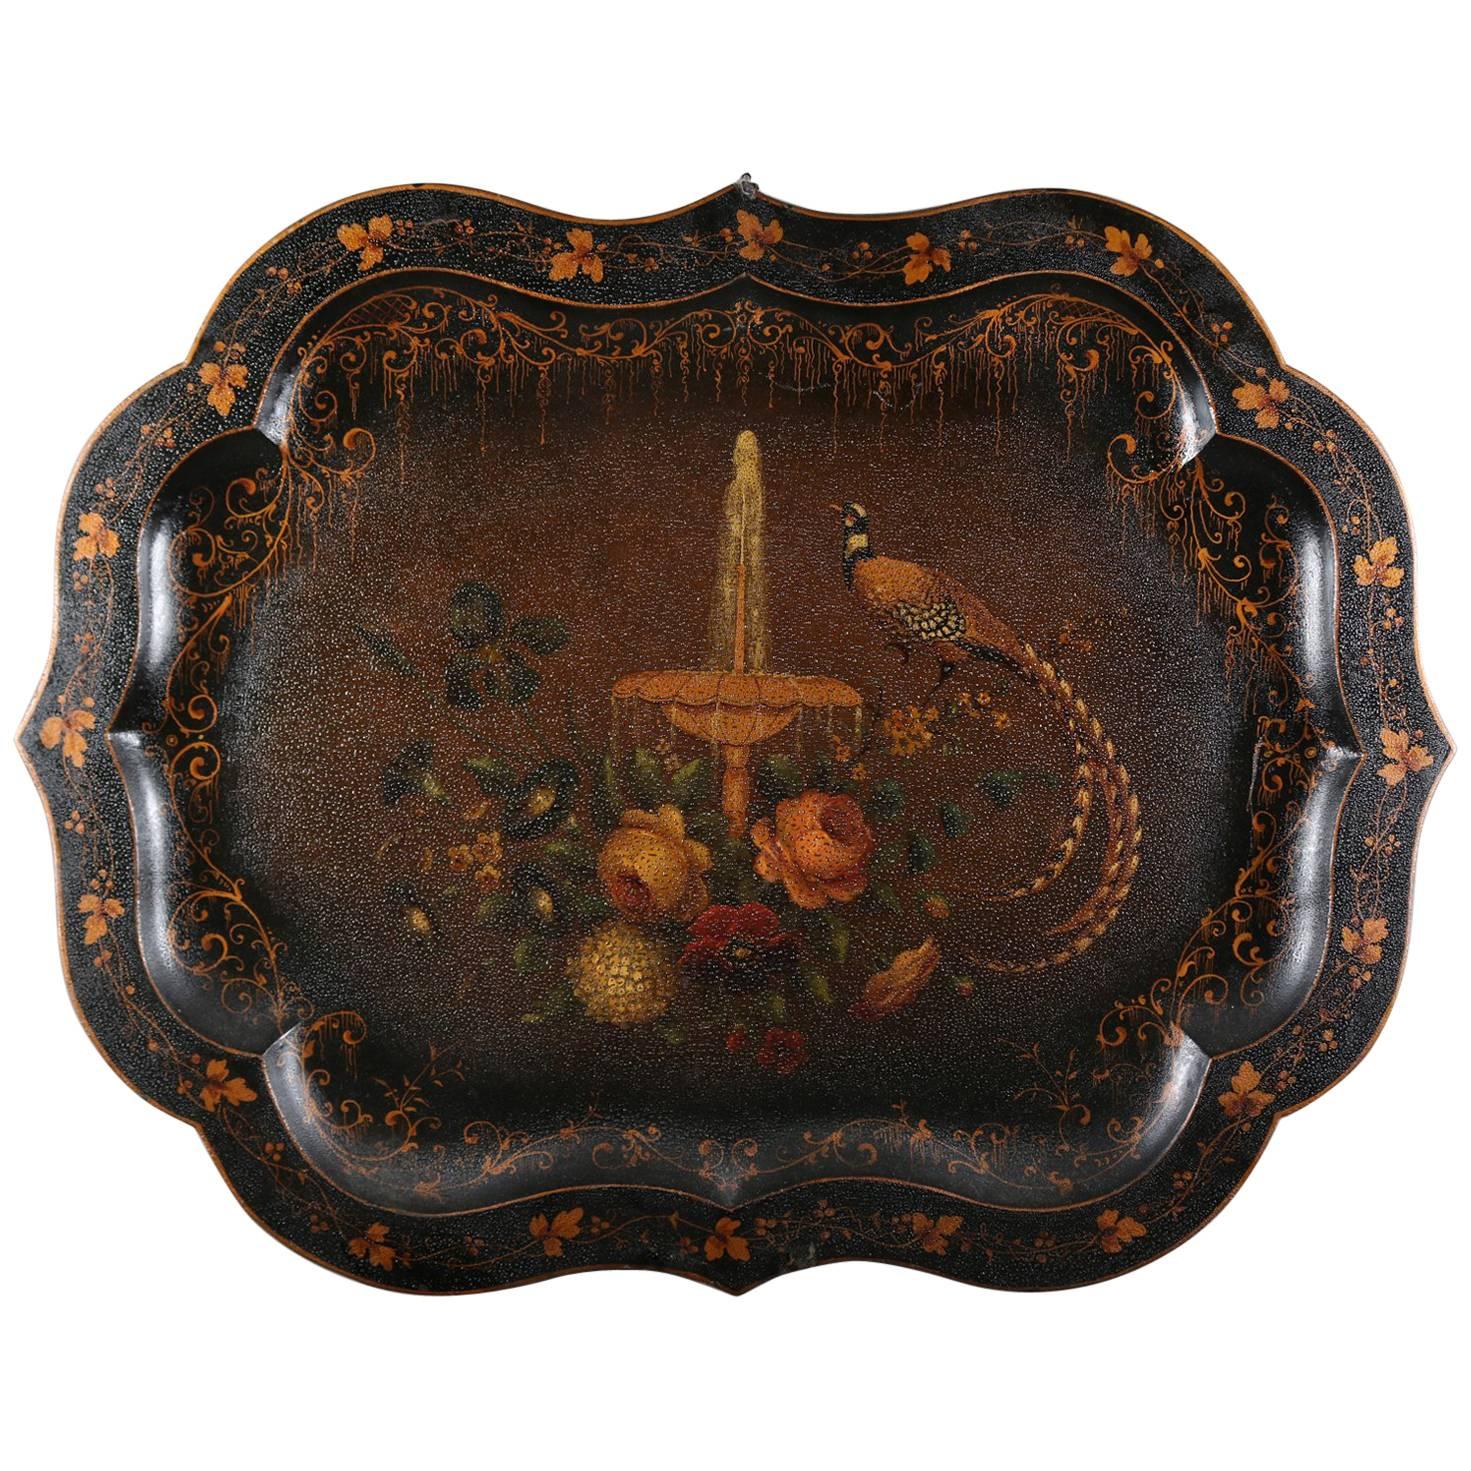 Antique Hand-Painted & Gilt Toleware Tray with Pheasant, Floral & Urn Decorated